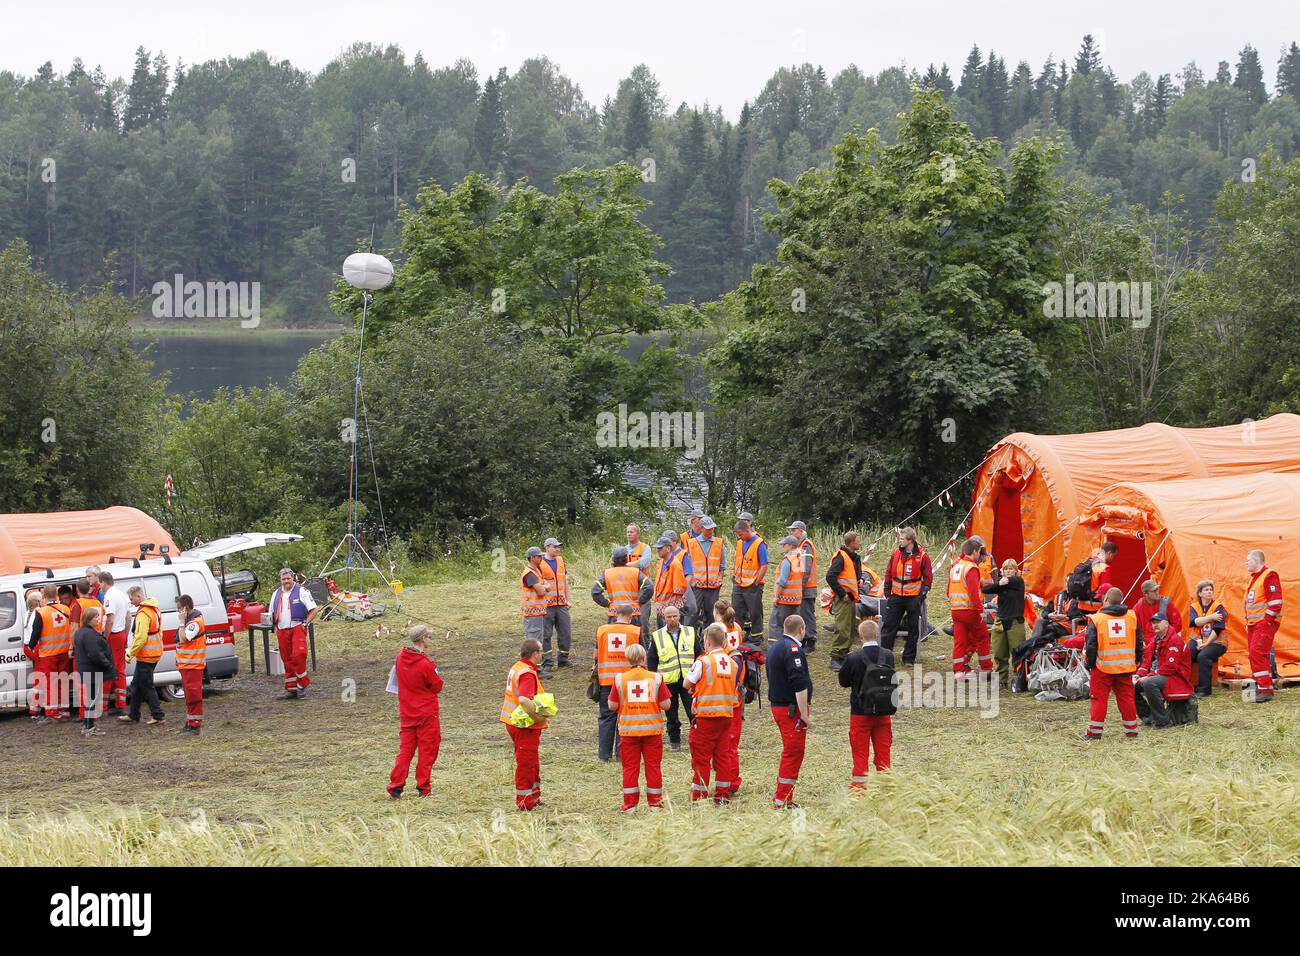 Sundvolden 20110723. Utoya youth massacre aftermath. Rescue and search work is operated from this base at Storoya in Tyrifjord.  Photo: Haakon Mosvold Larsen / Scanpix Norway  Stock Photo